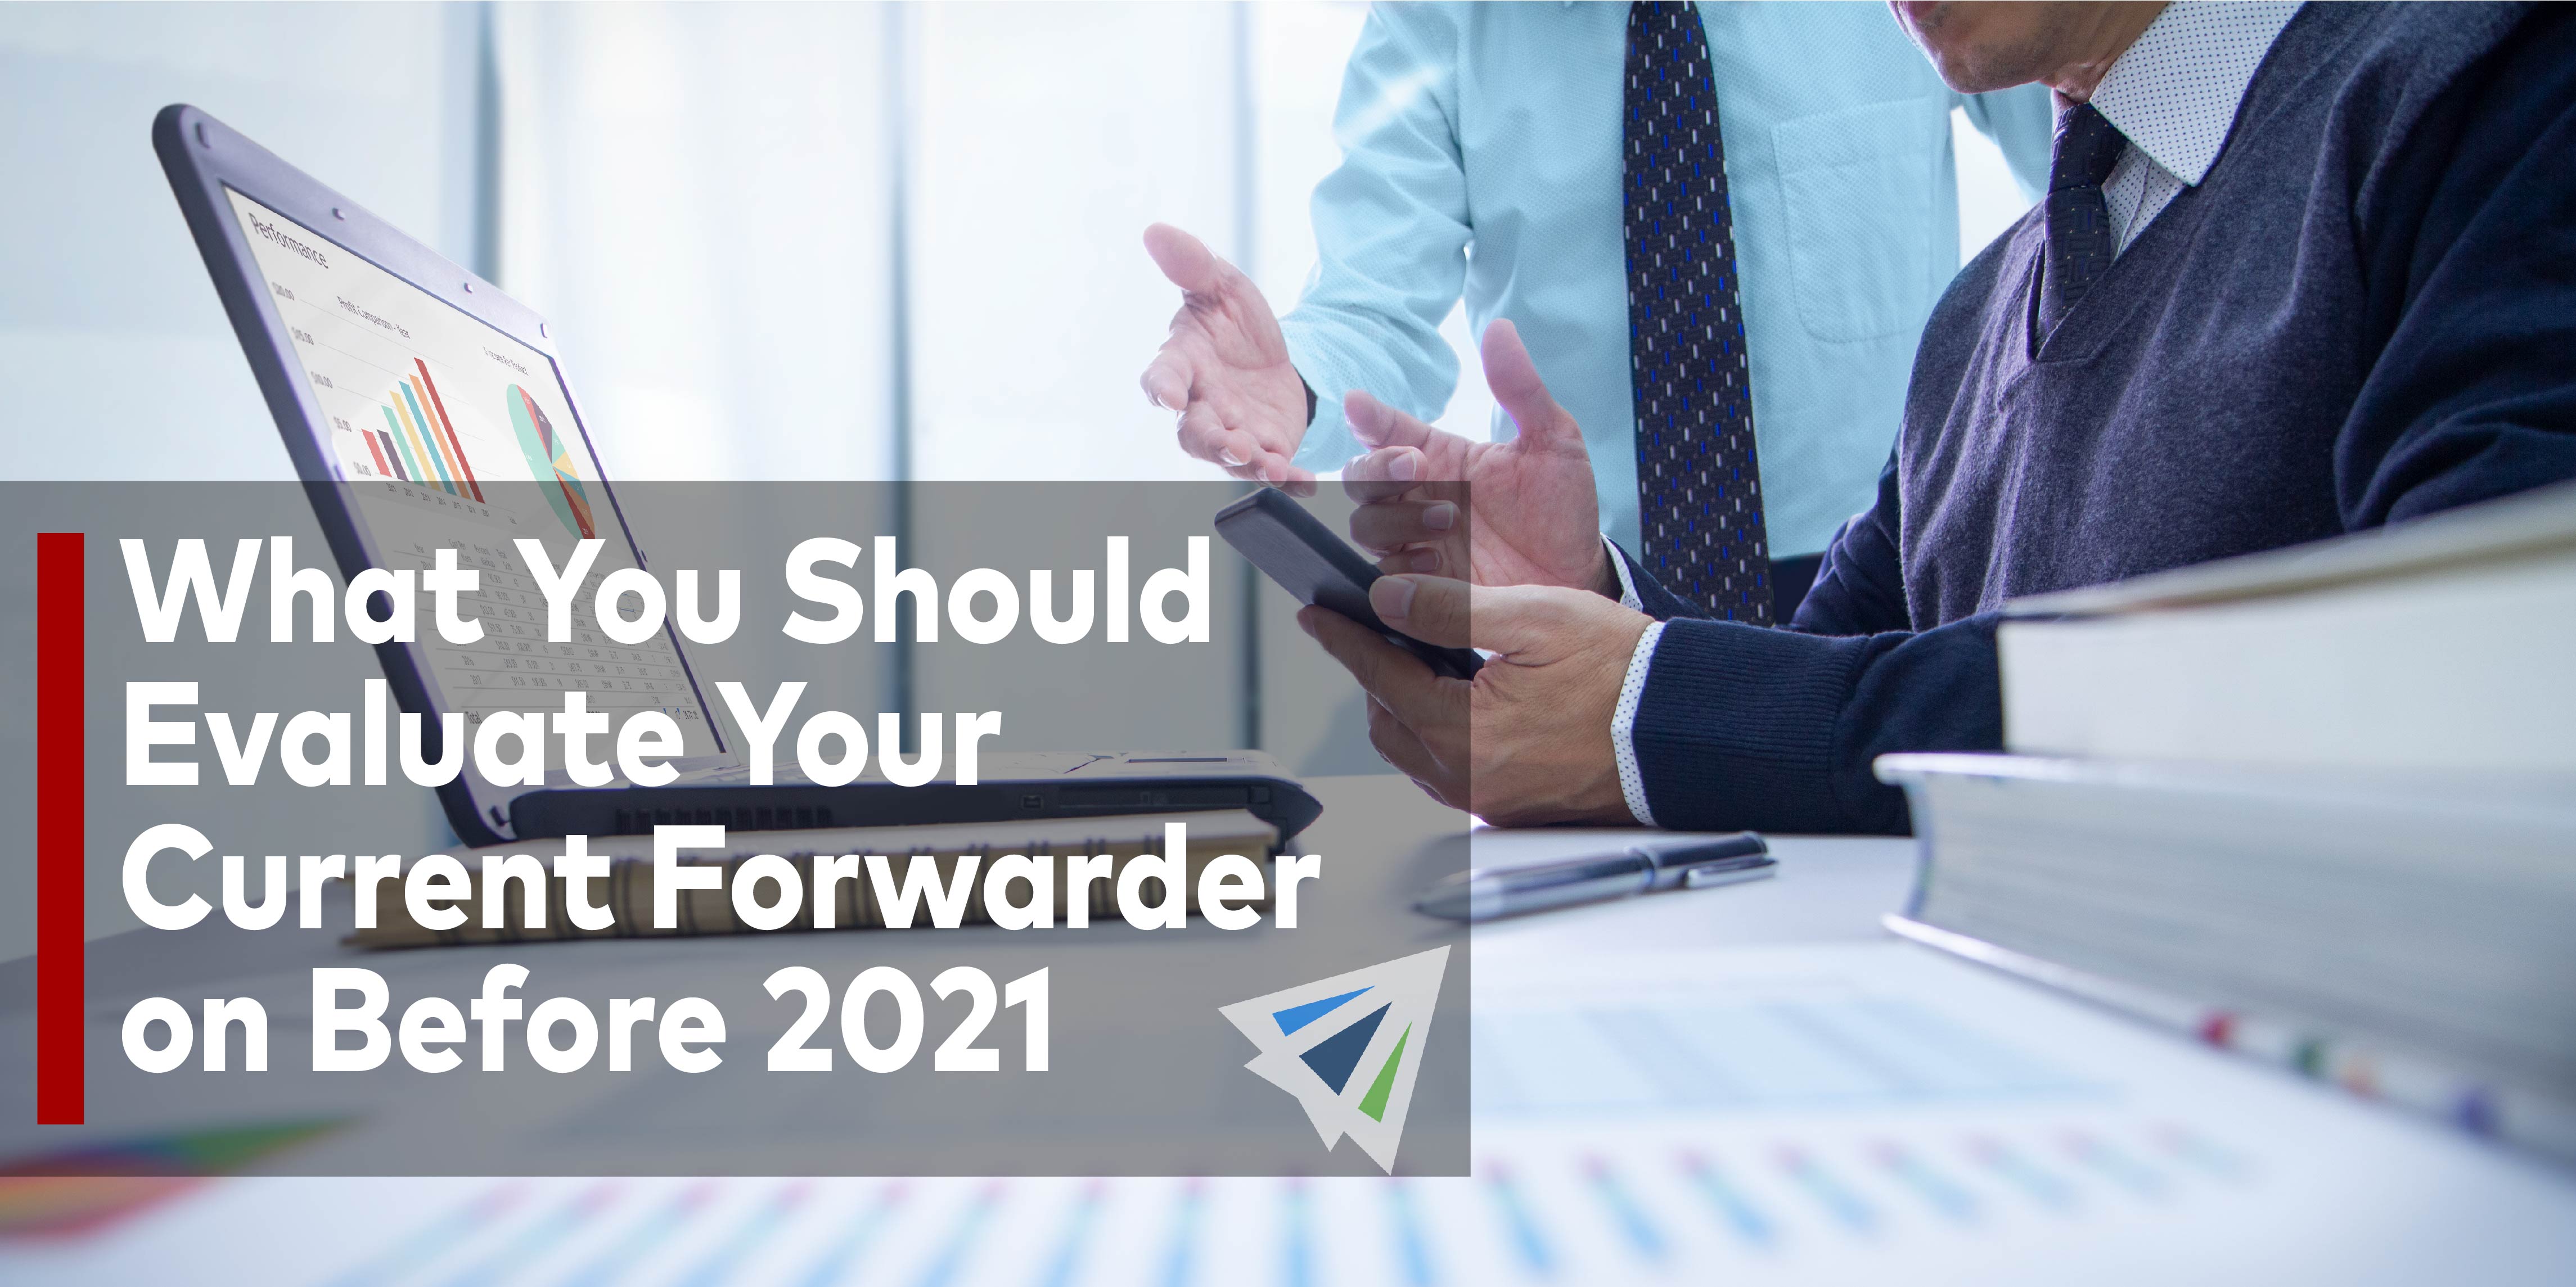 What You Should Evaluate Your Current Freight Forwarder on Before 2021